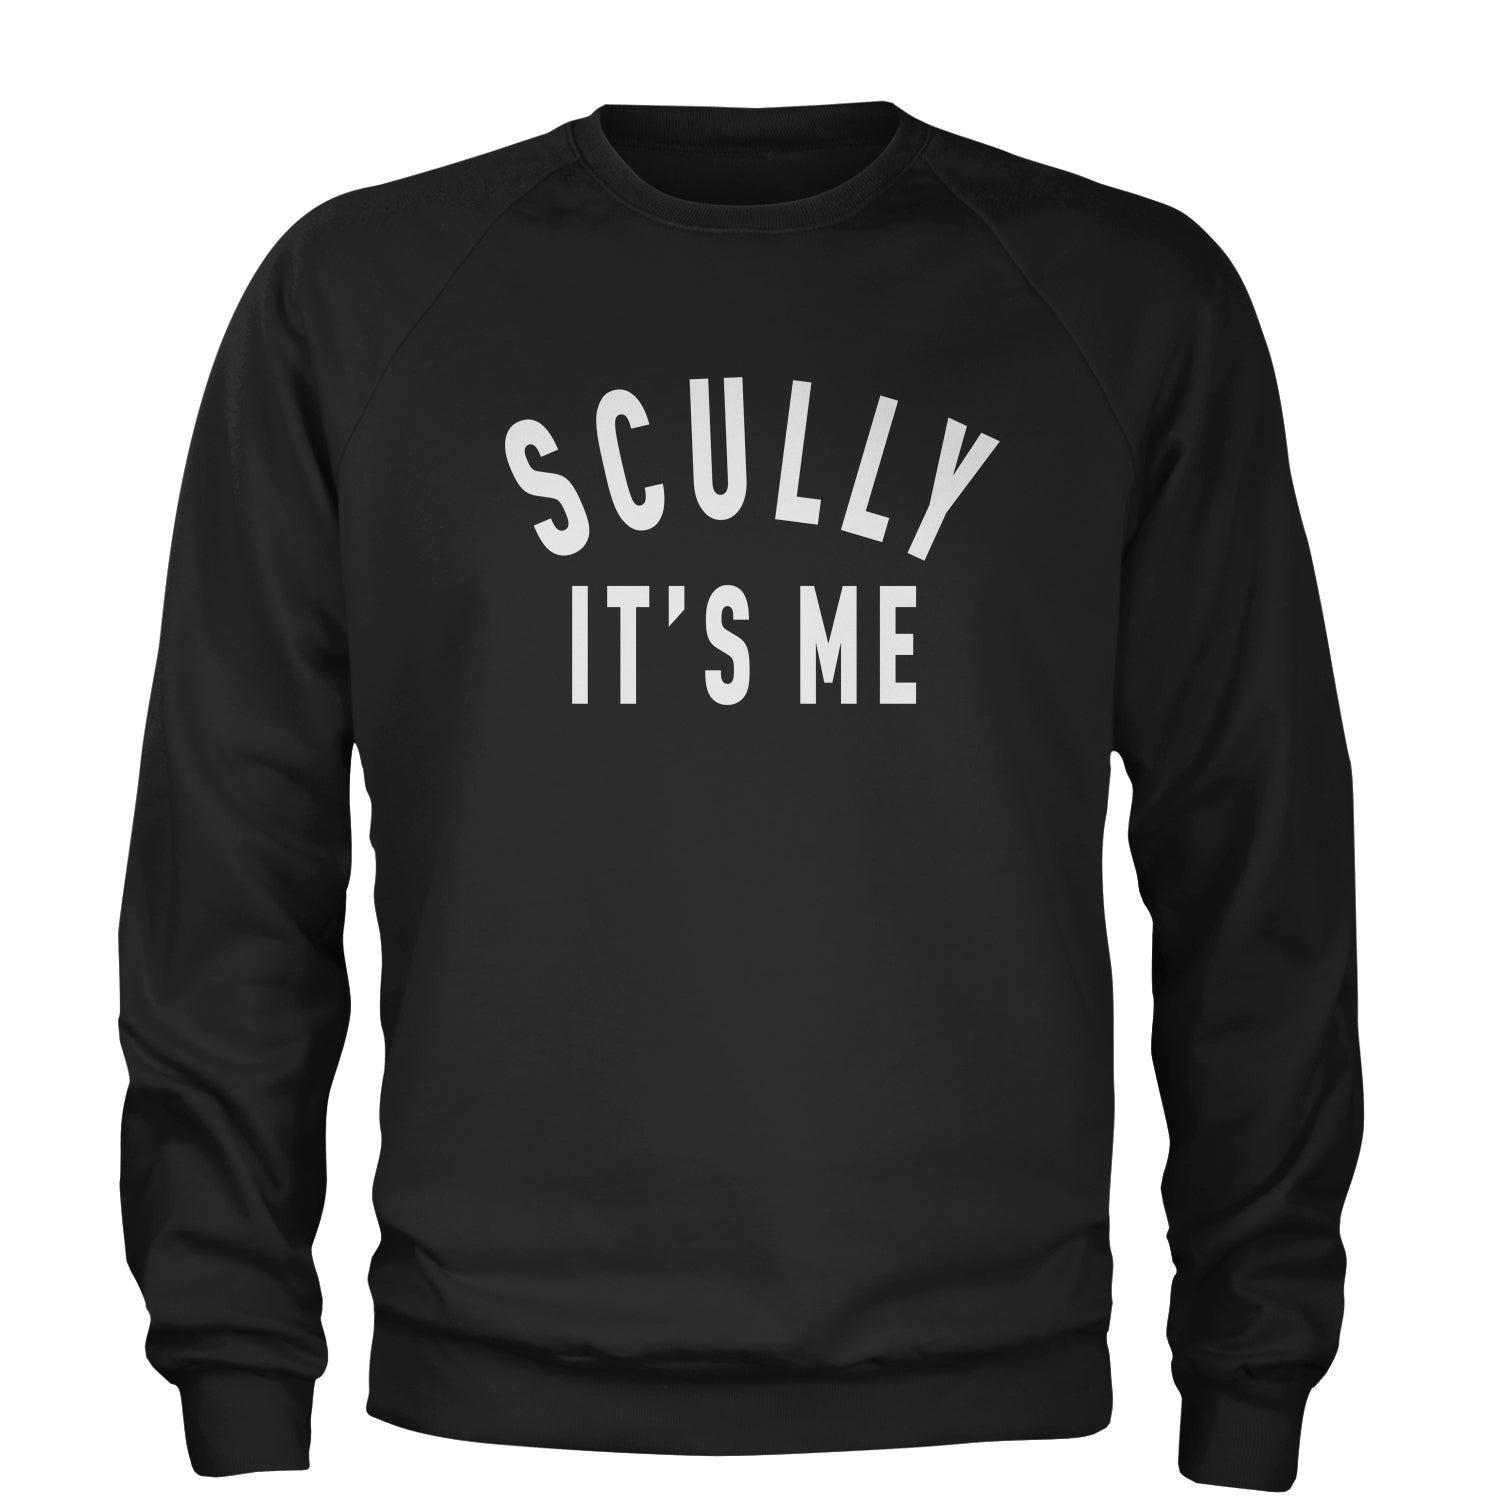 Scully, It's Me Adult Crewneck Sweatshirt #expressiontees by Expression Tees